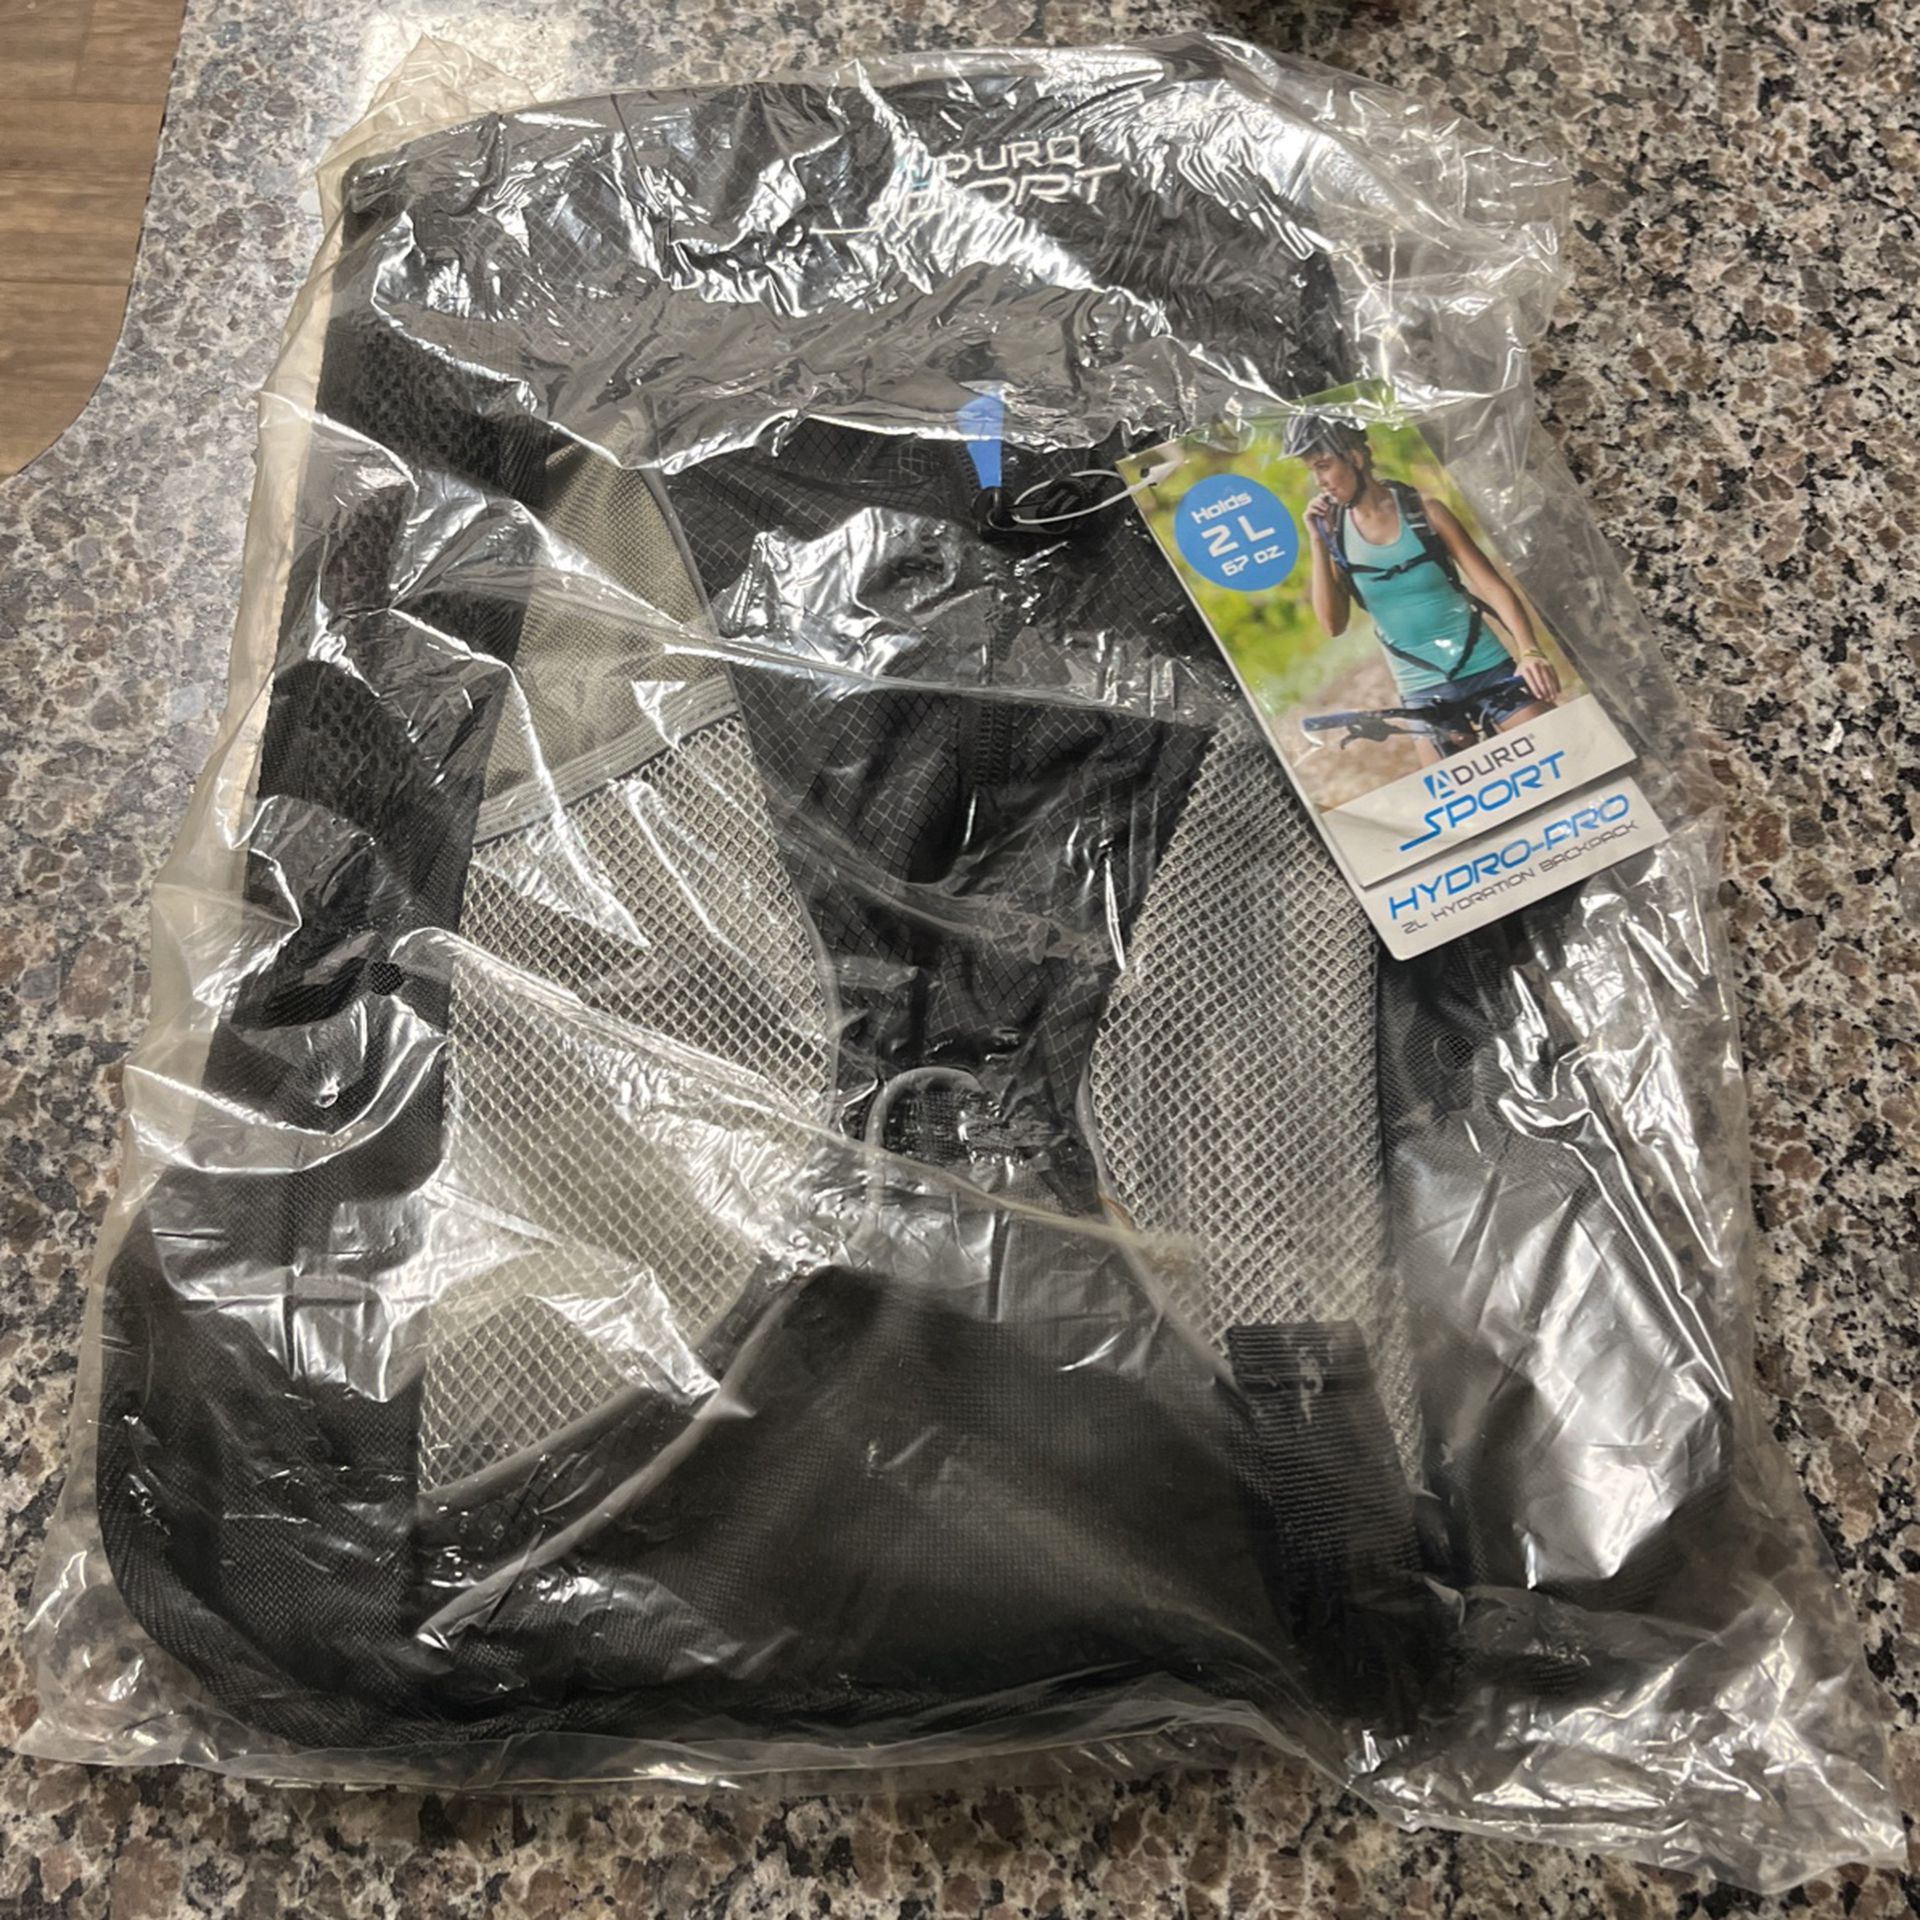 Camelback  Hydration Backpack  Brand New Still In Packaging! 